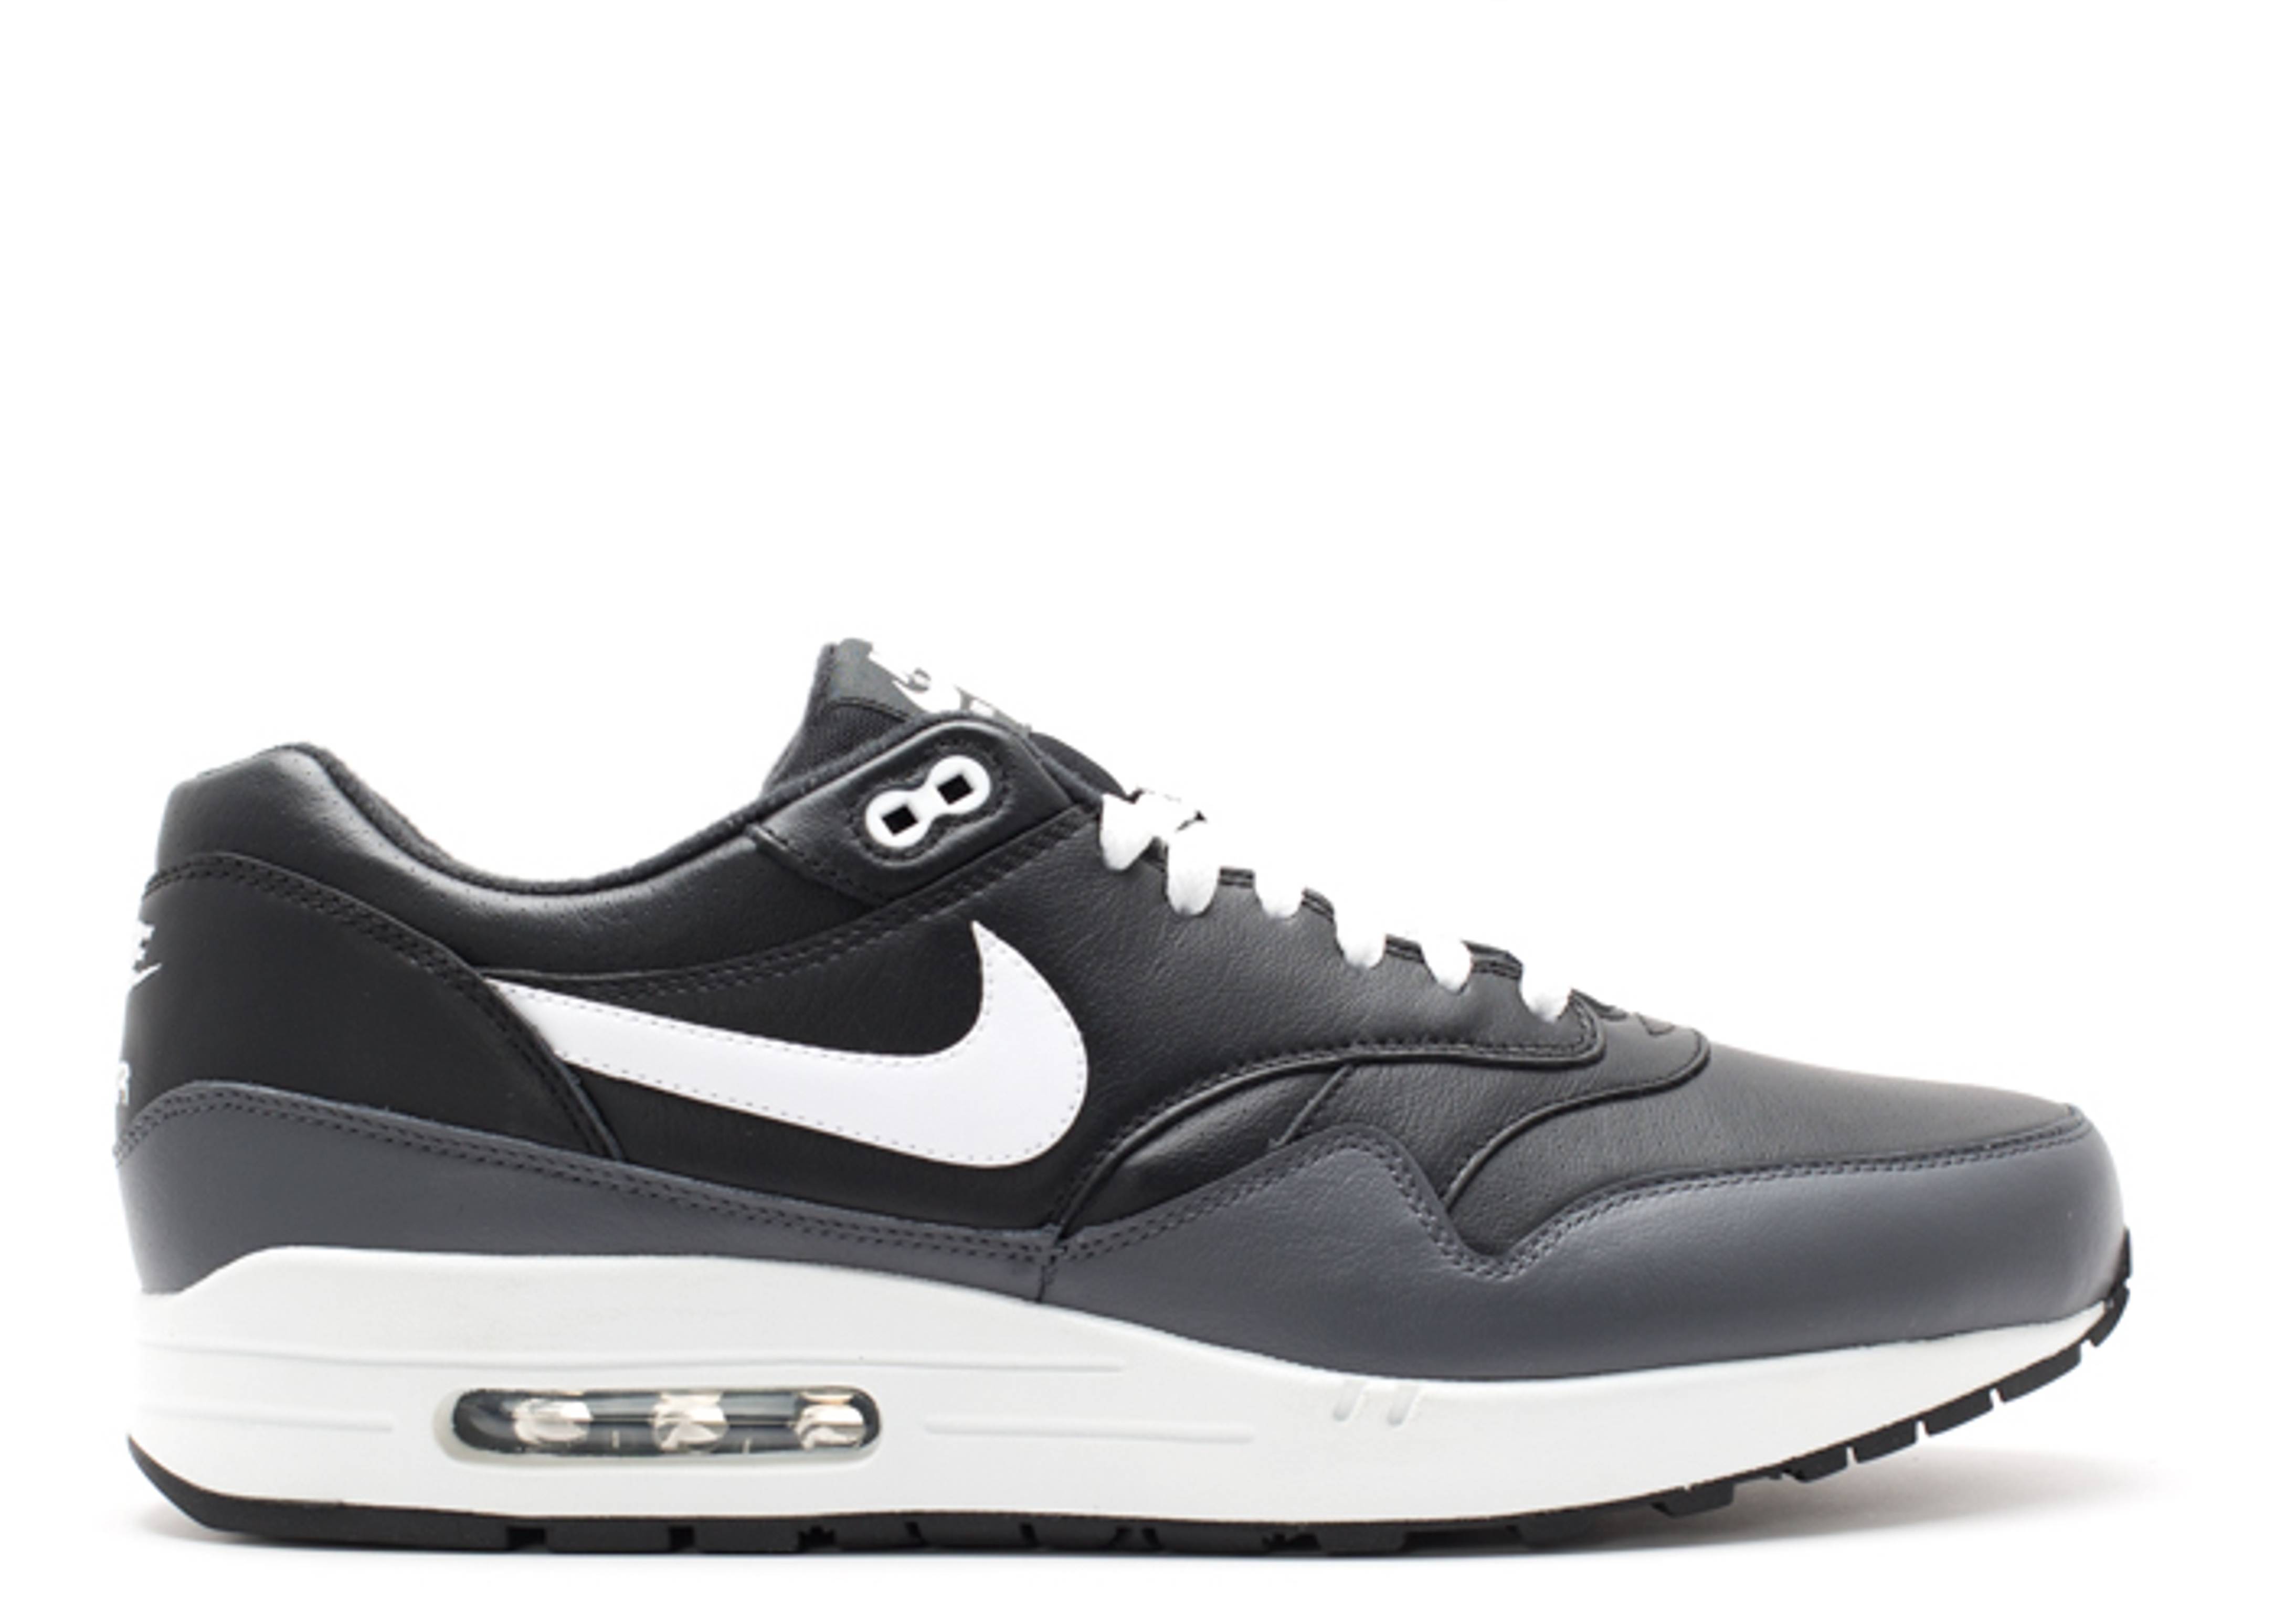 Air Max 1 Leather 'Black Grey White'